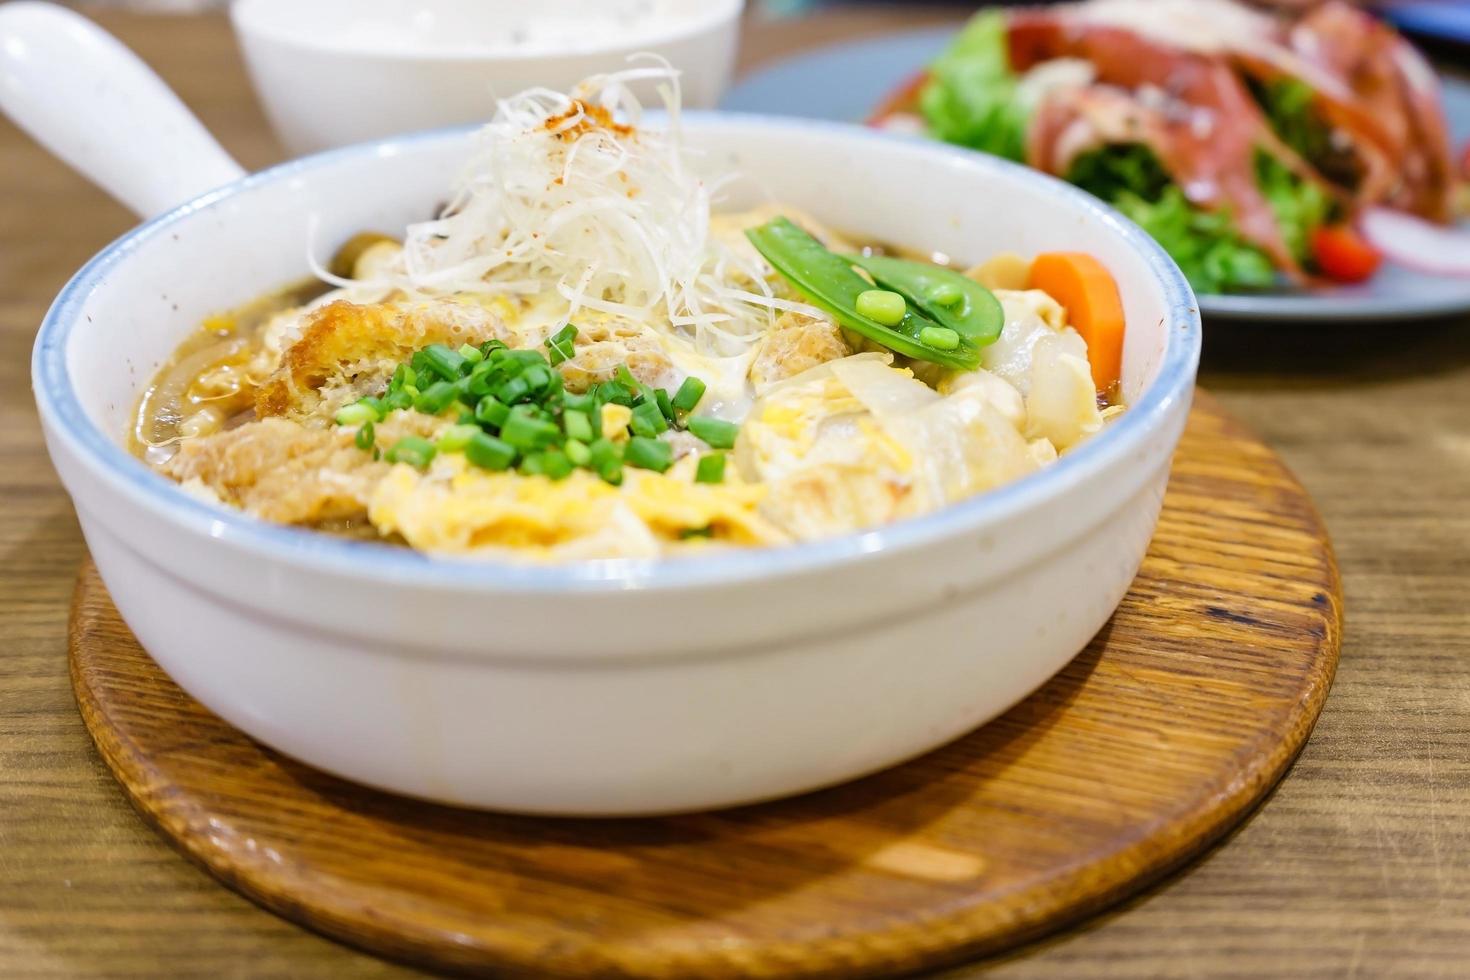 Katsudon or Japanese style fried pork roast with egg and Japanese ingredient mixed on rice ready to serve in restaurant photo